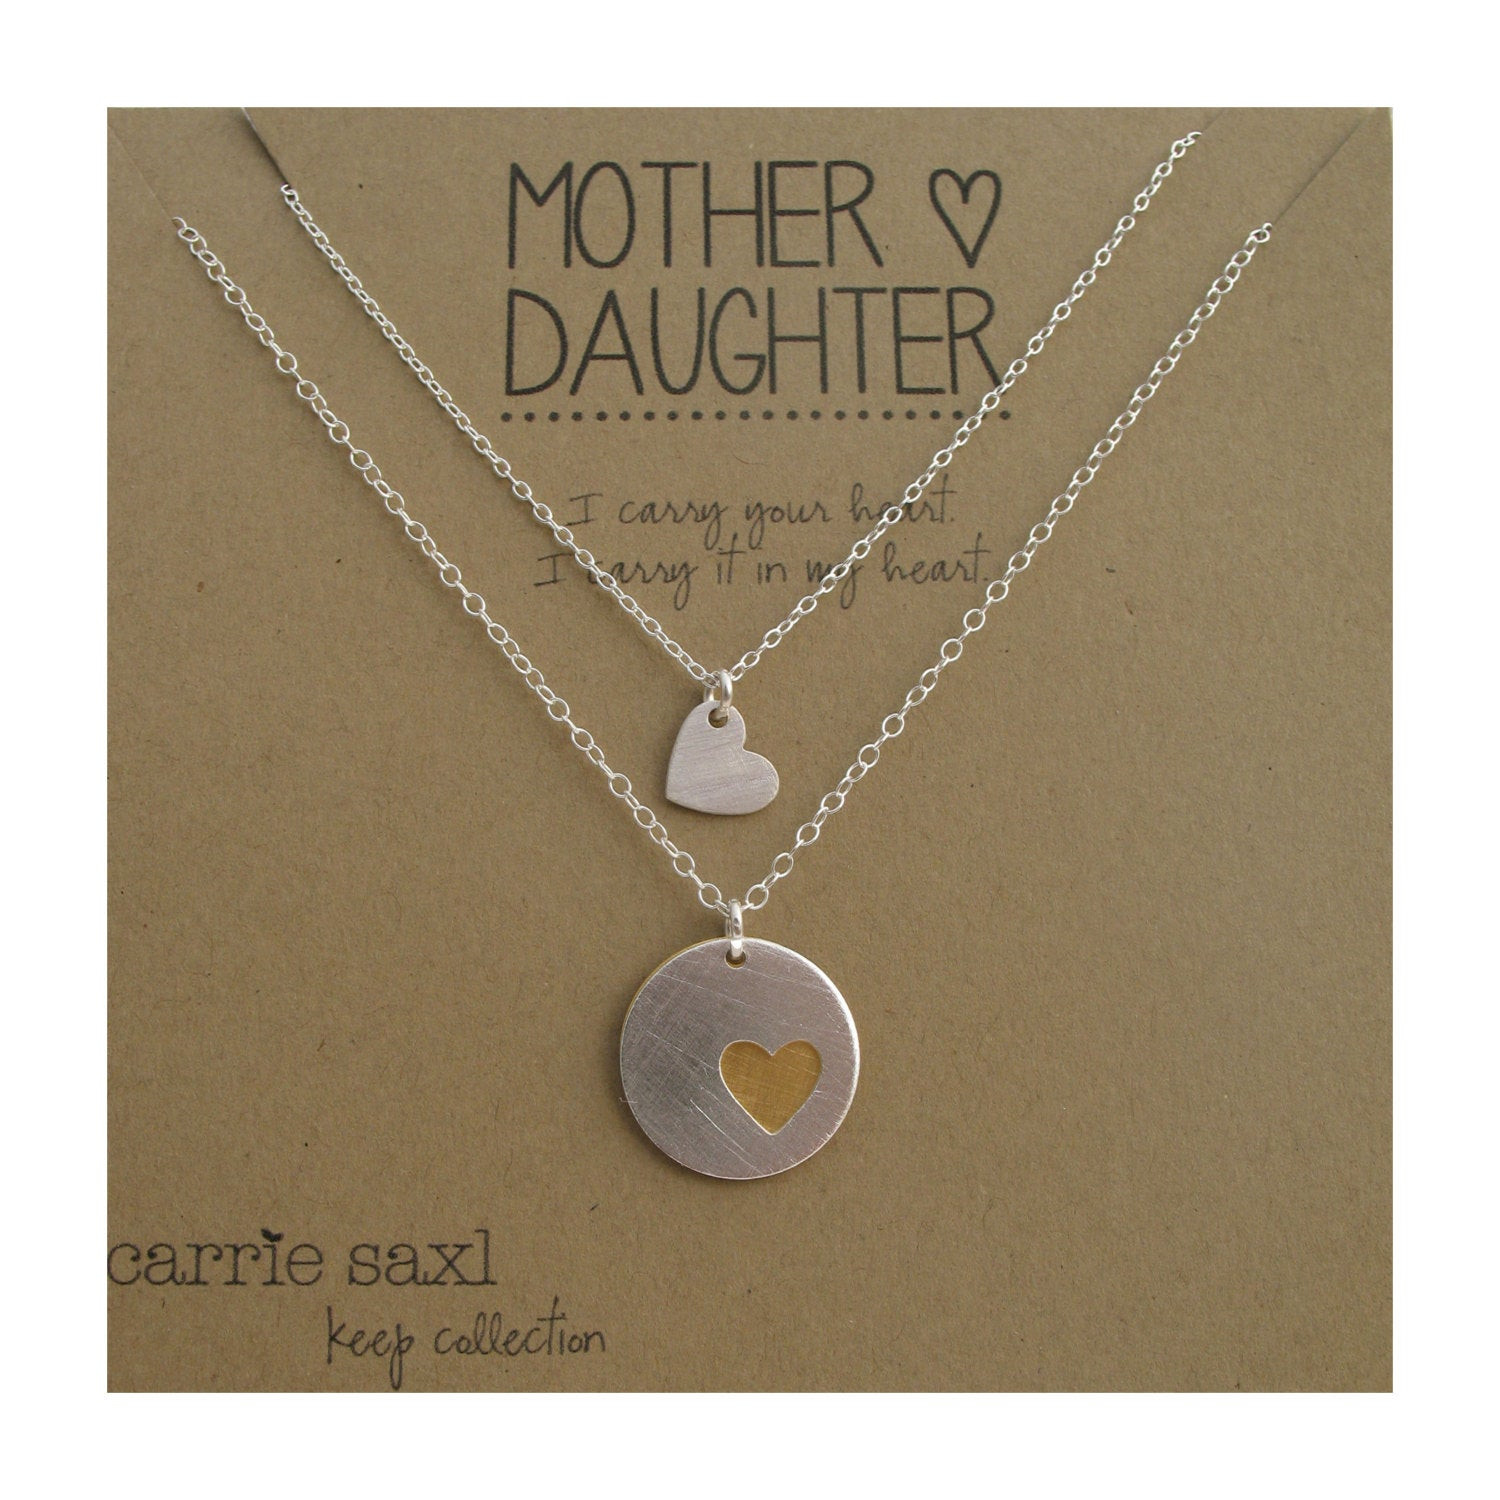 Mother Daughter Necklace Set
 Mother Daughter Necklace Set mother necklace mom by carriesaxl